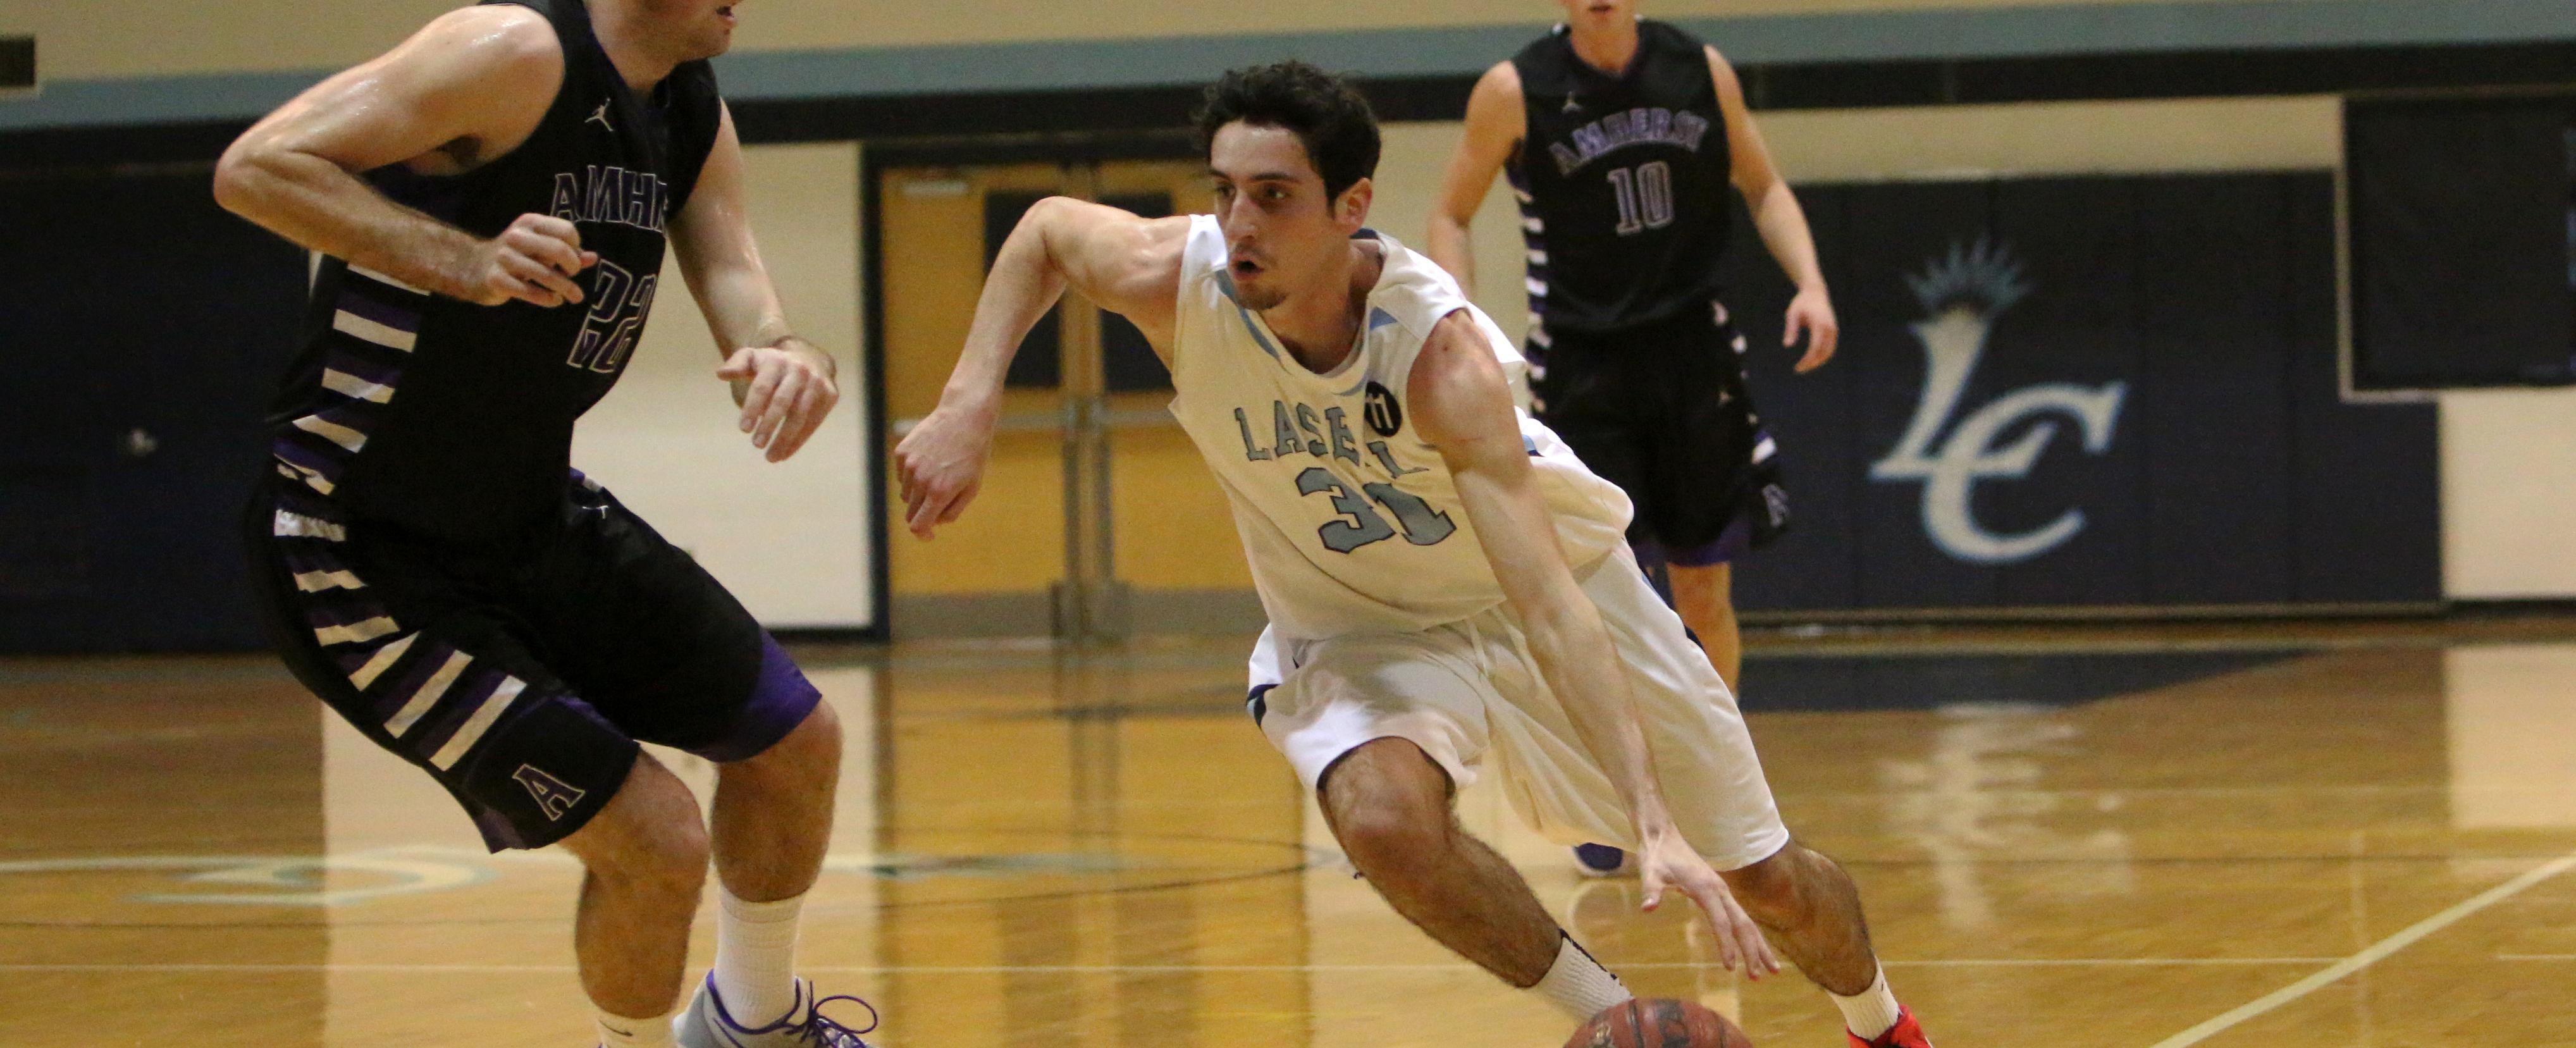 No. 3 Amherst College Downs Men’s Hoops 101-69